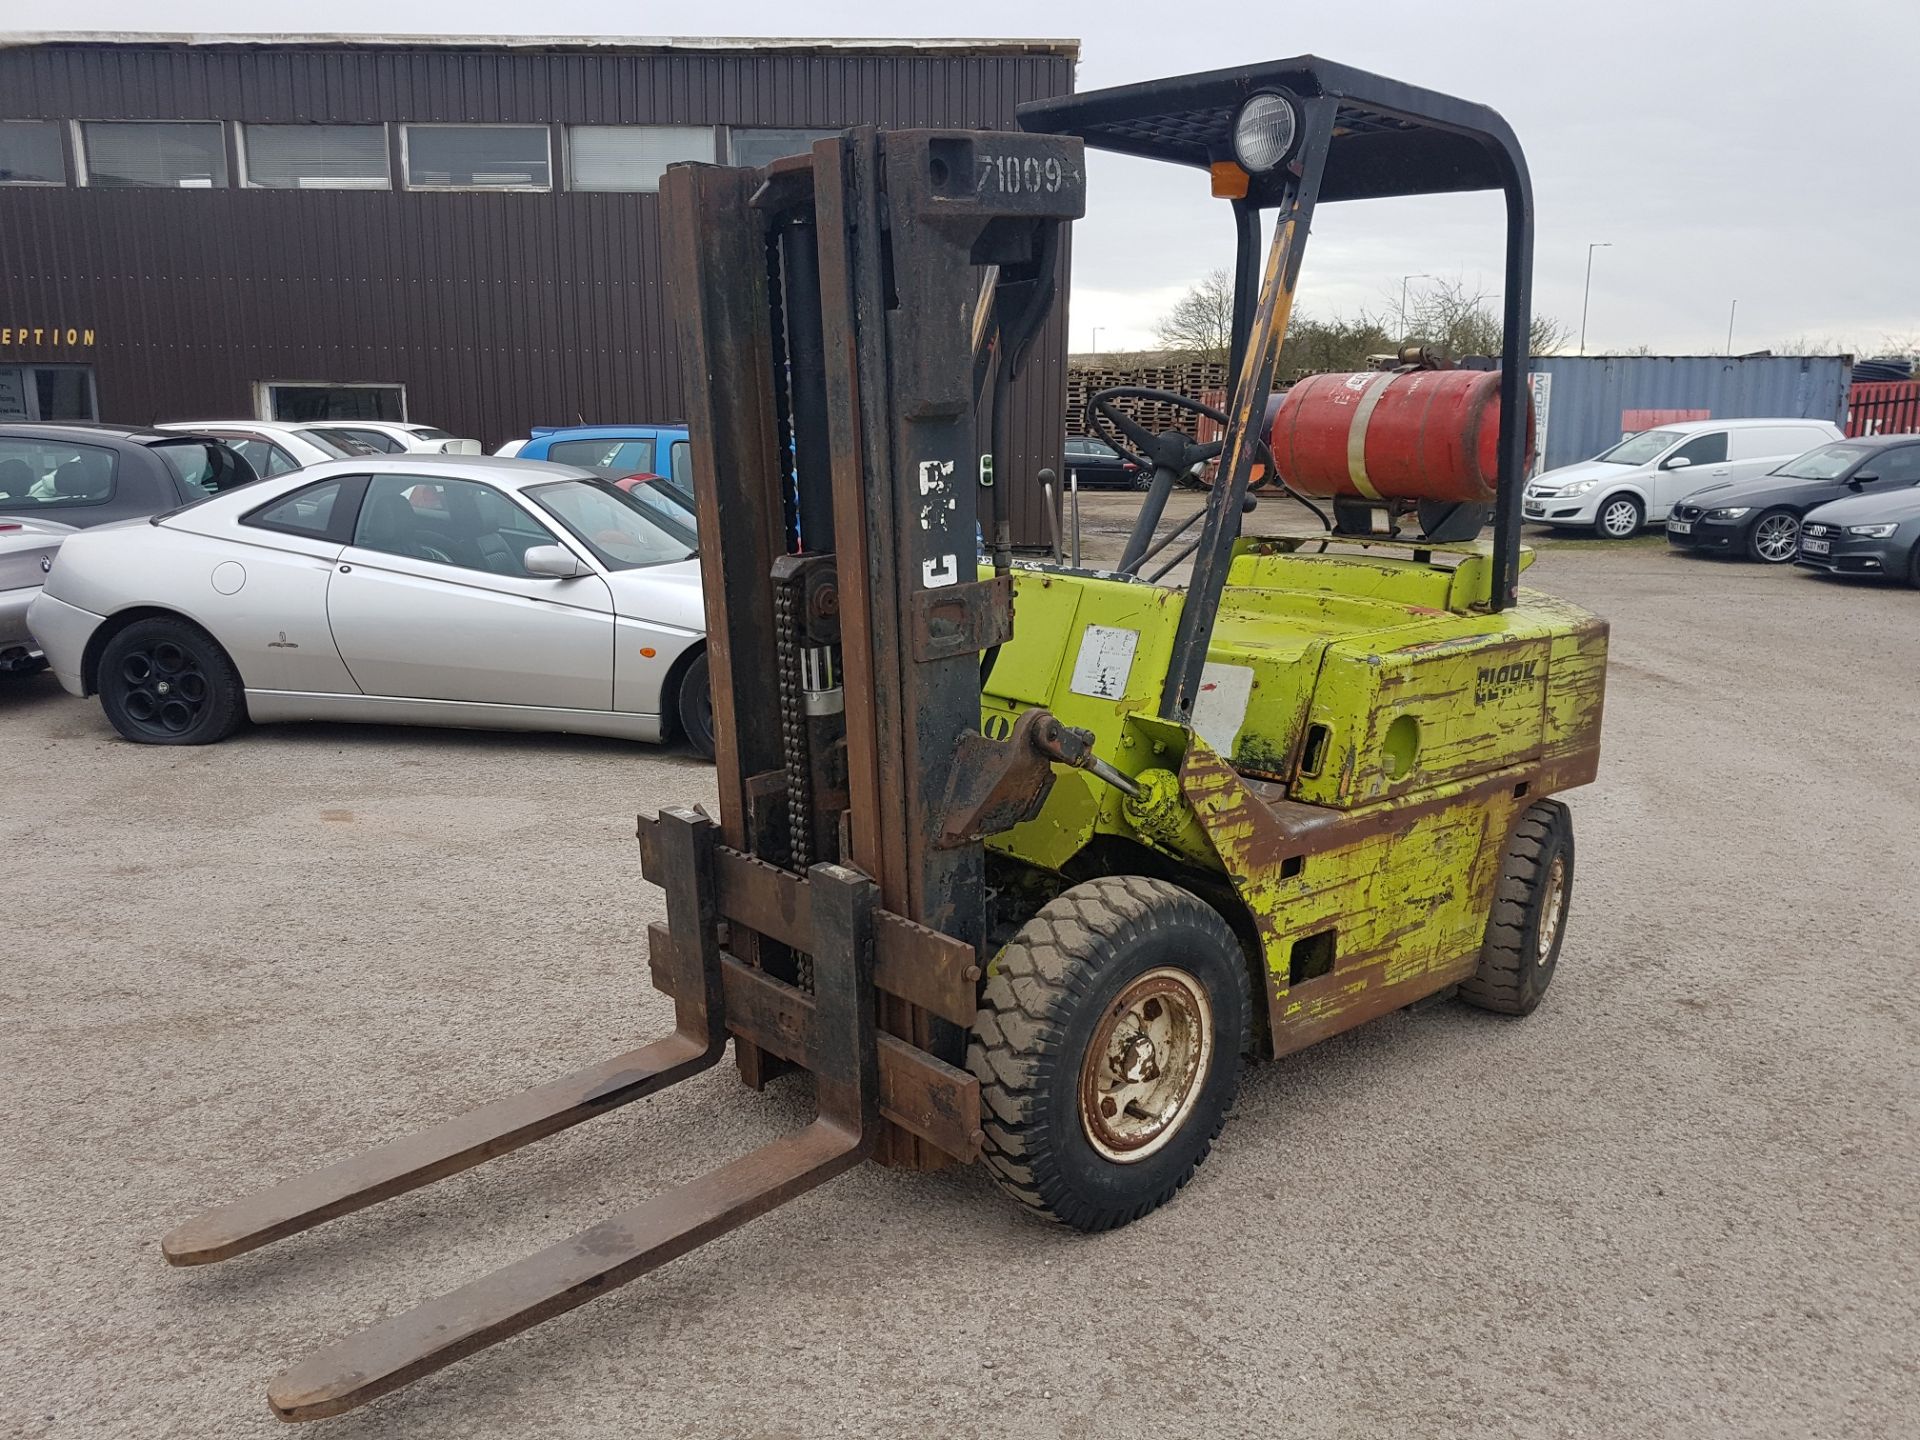 2.5 TONNE, CLARKE C500-Y50 GAS POWERED FORKLIFT, YEAR UNKNOWN - Image 3 of 17